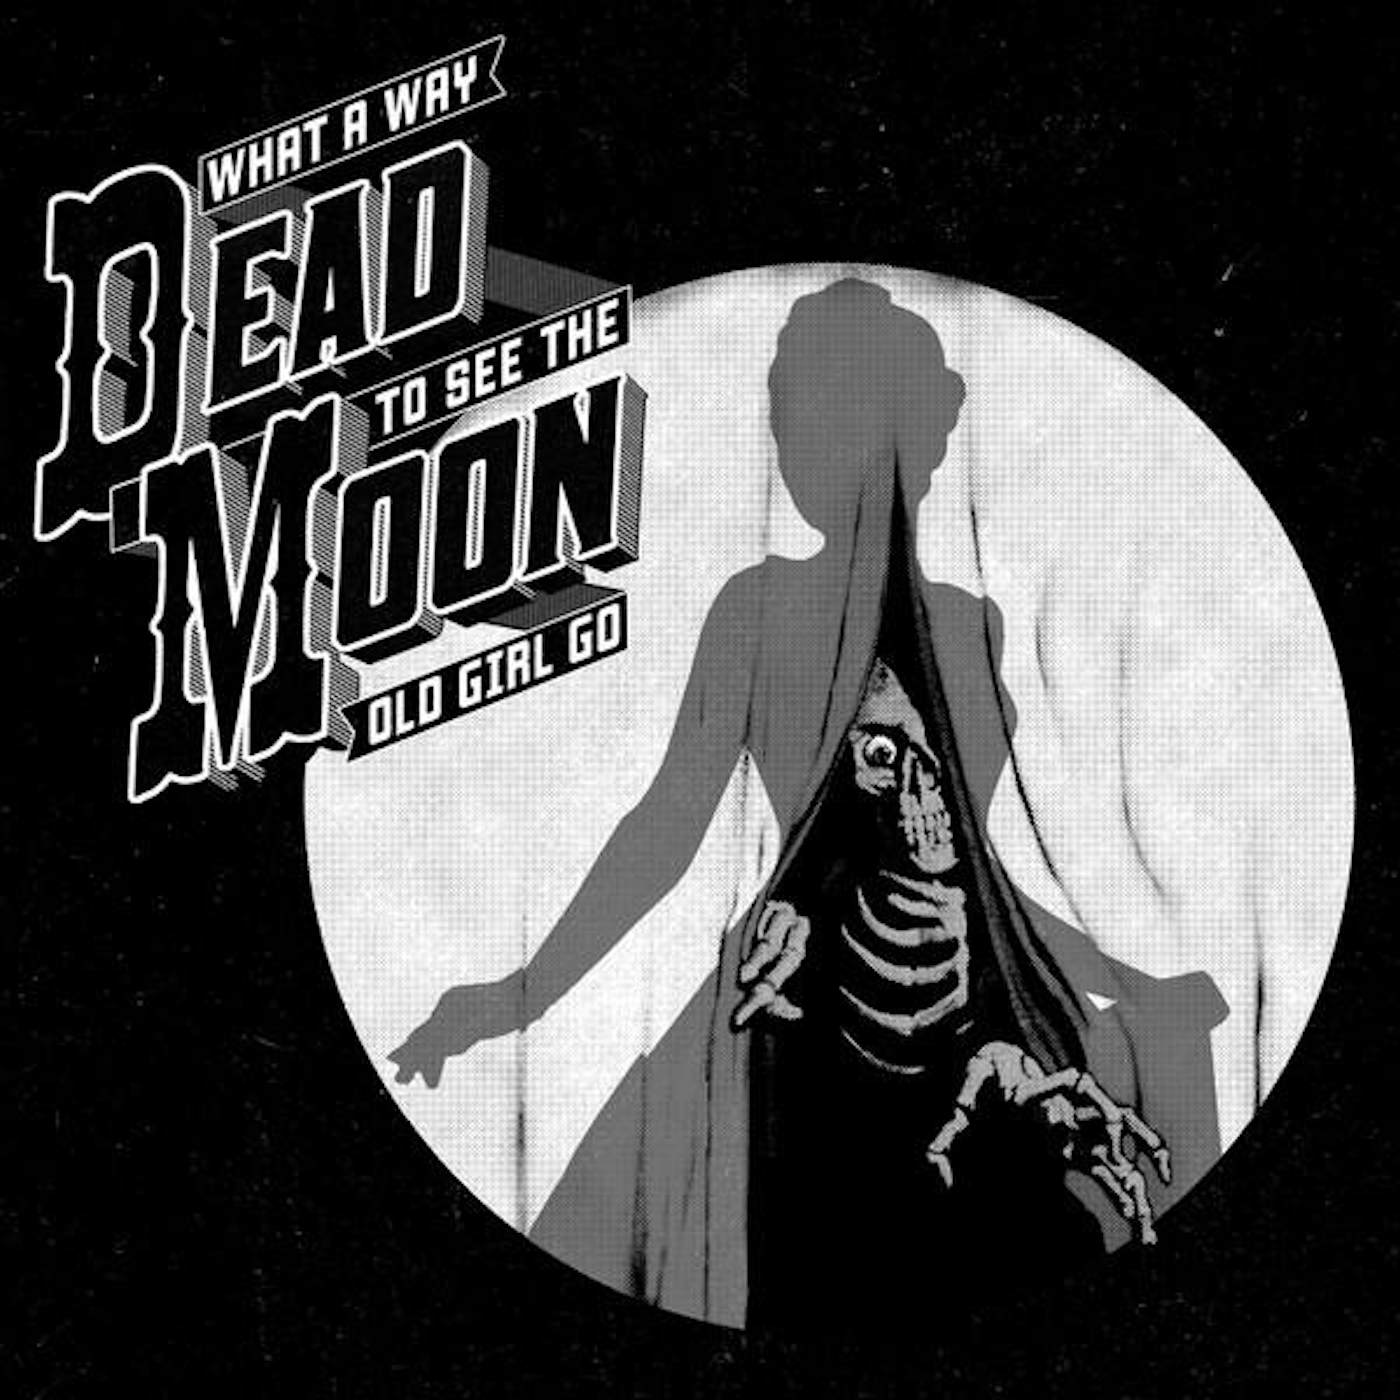 Dead Moon WHAT A WAY TO SEE THE OLD GIRL GO CD